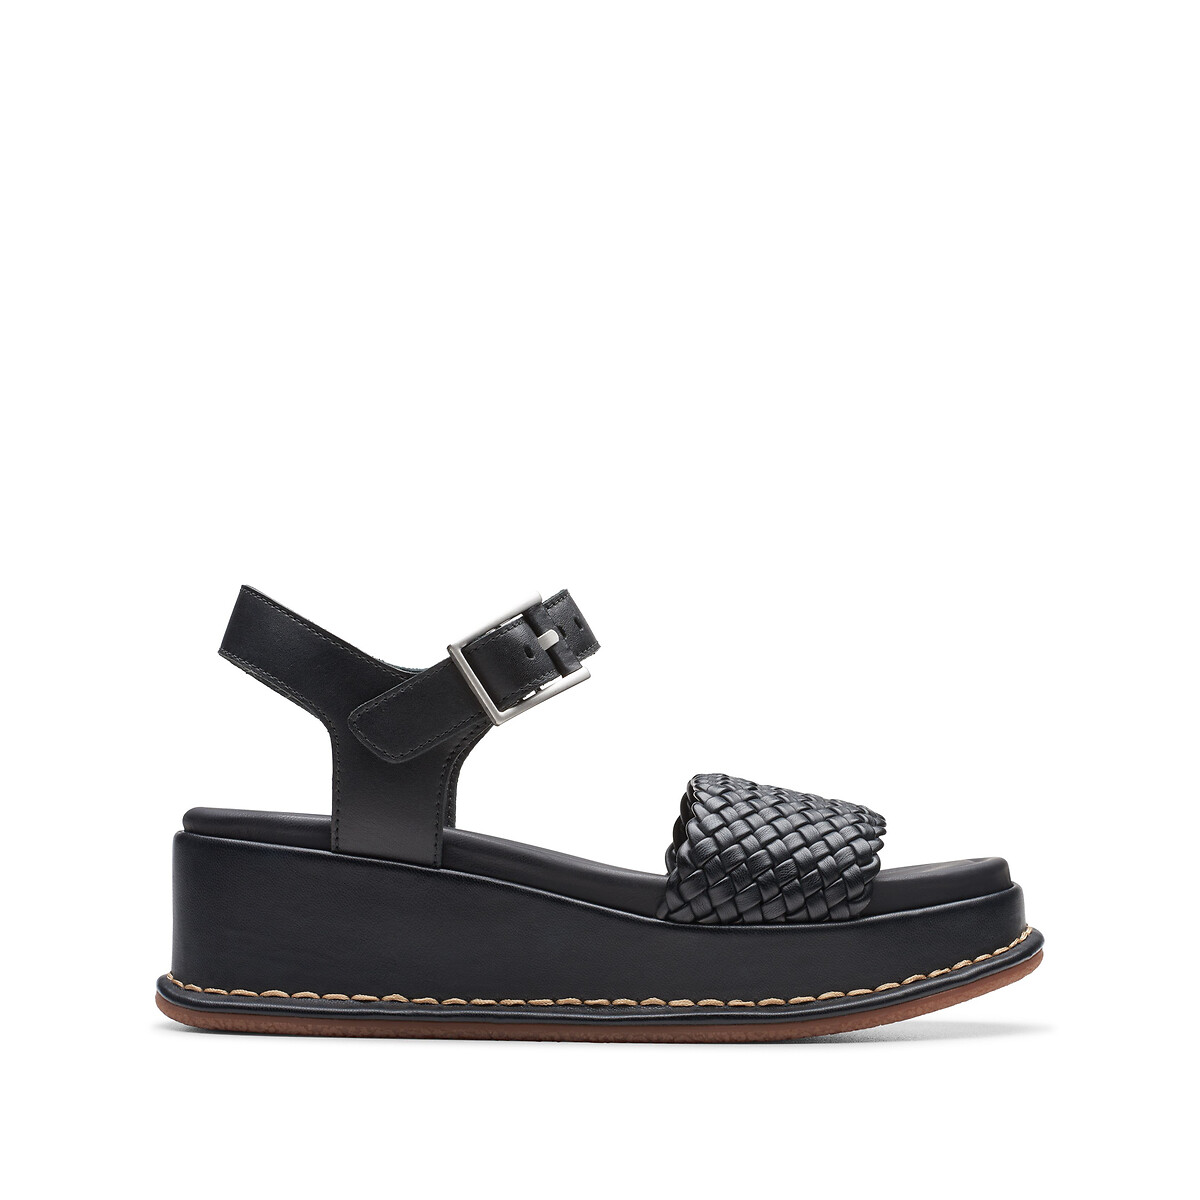 Kimmei Bay Leather Sandals with Wedge Heel